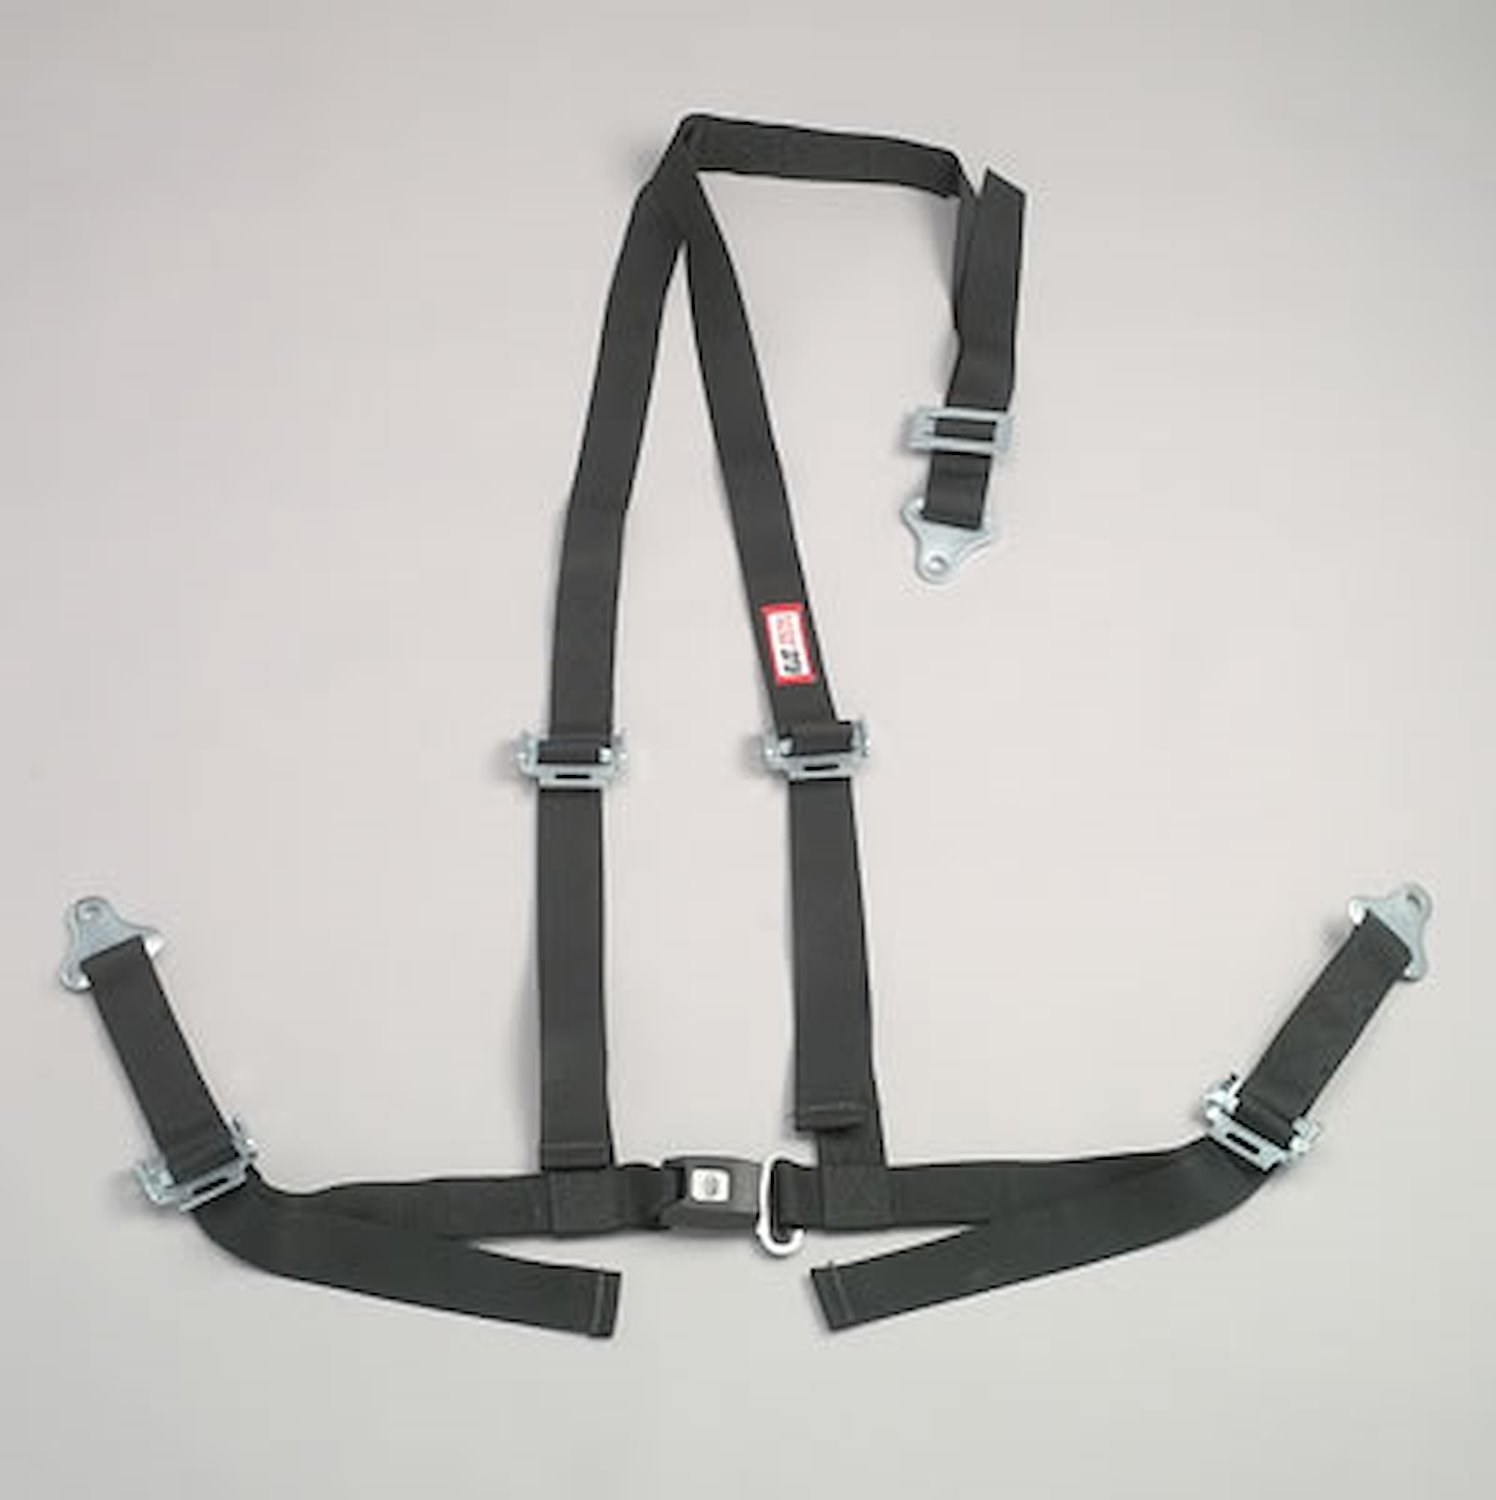 NON-SFI B&T HARNESS 2 PULL UP Lap Belt SNAP 2 S. H. Individual ROLL BAR Mount WRAP/SNAP BLACK